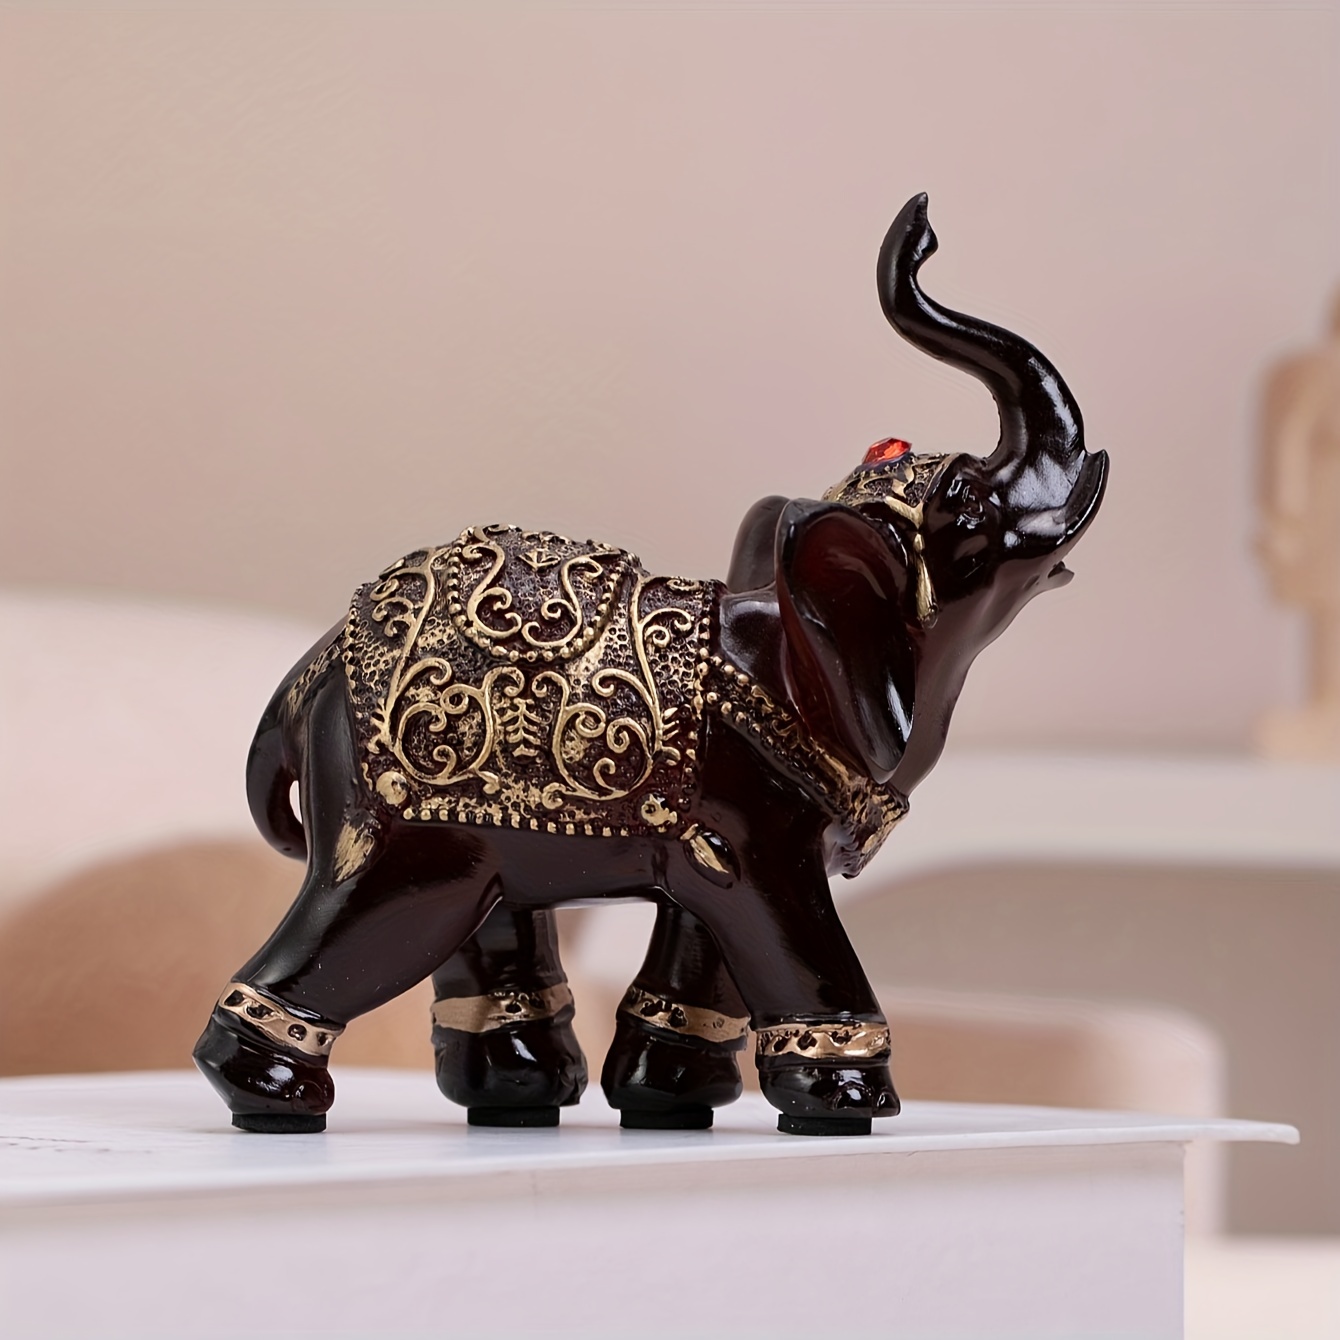 Elephant Decor Statue, Elephant Gifts for Women, Modern Home Decor Accents  for